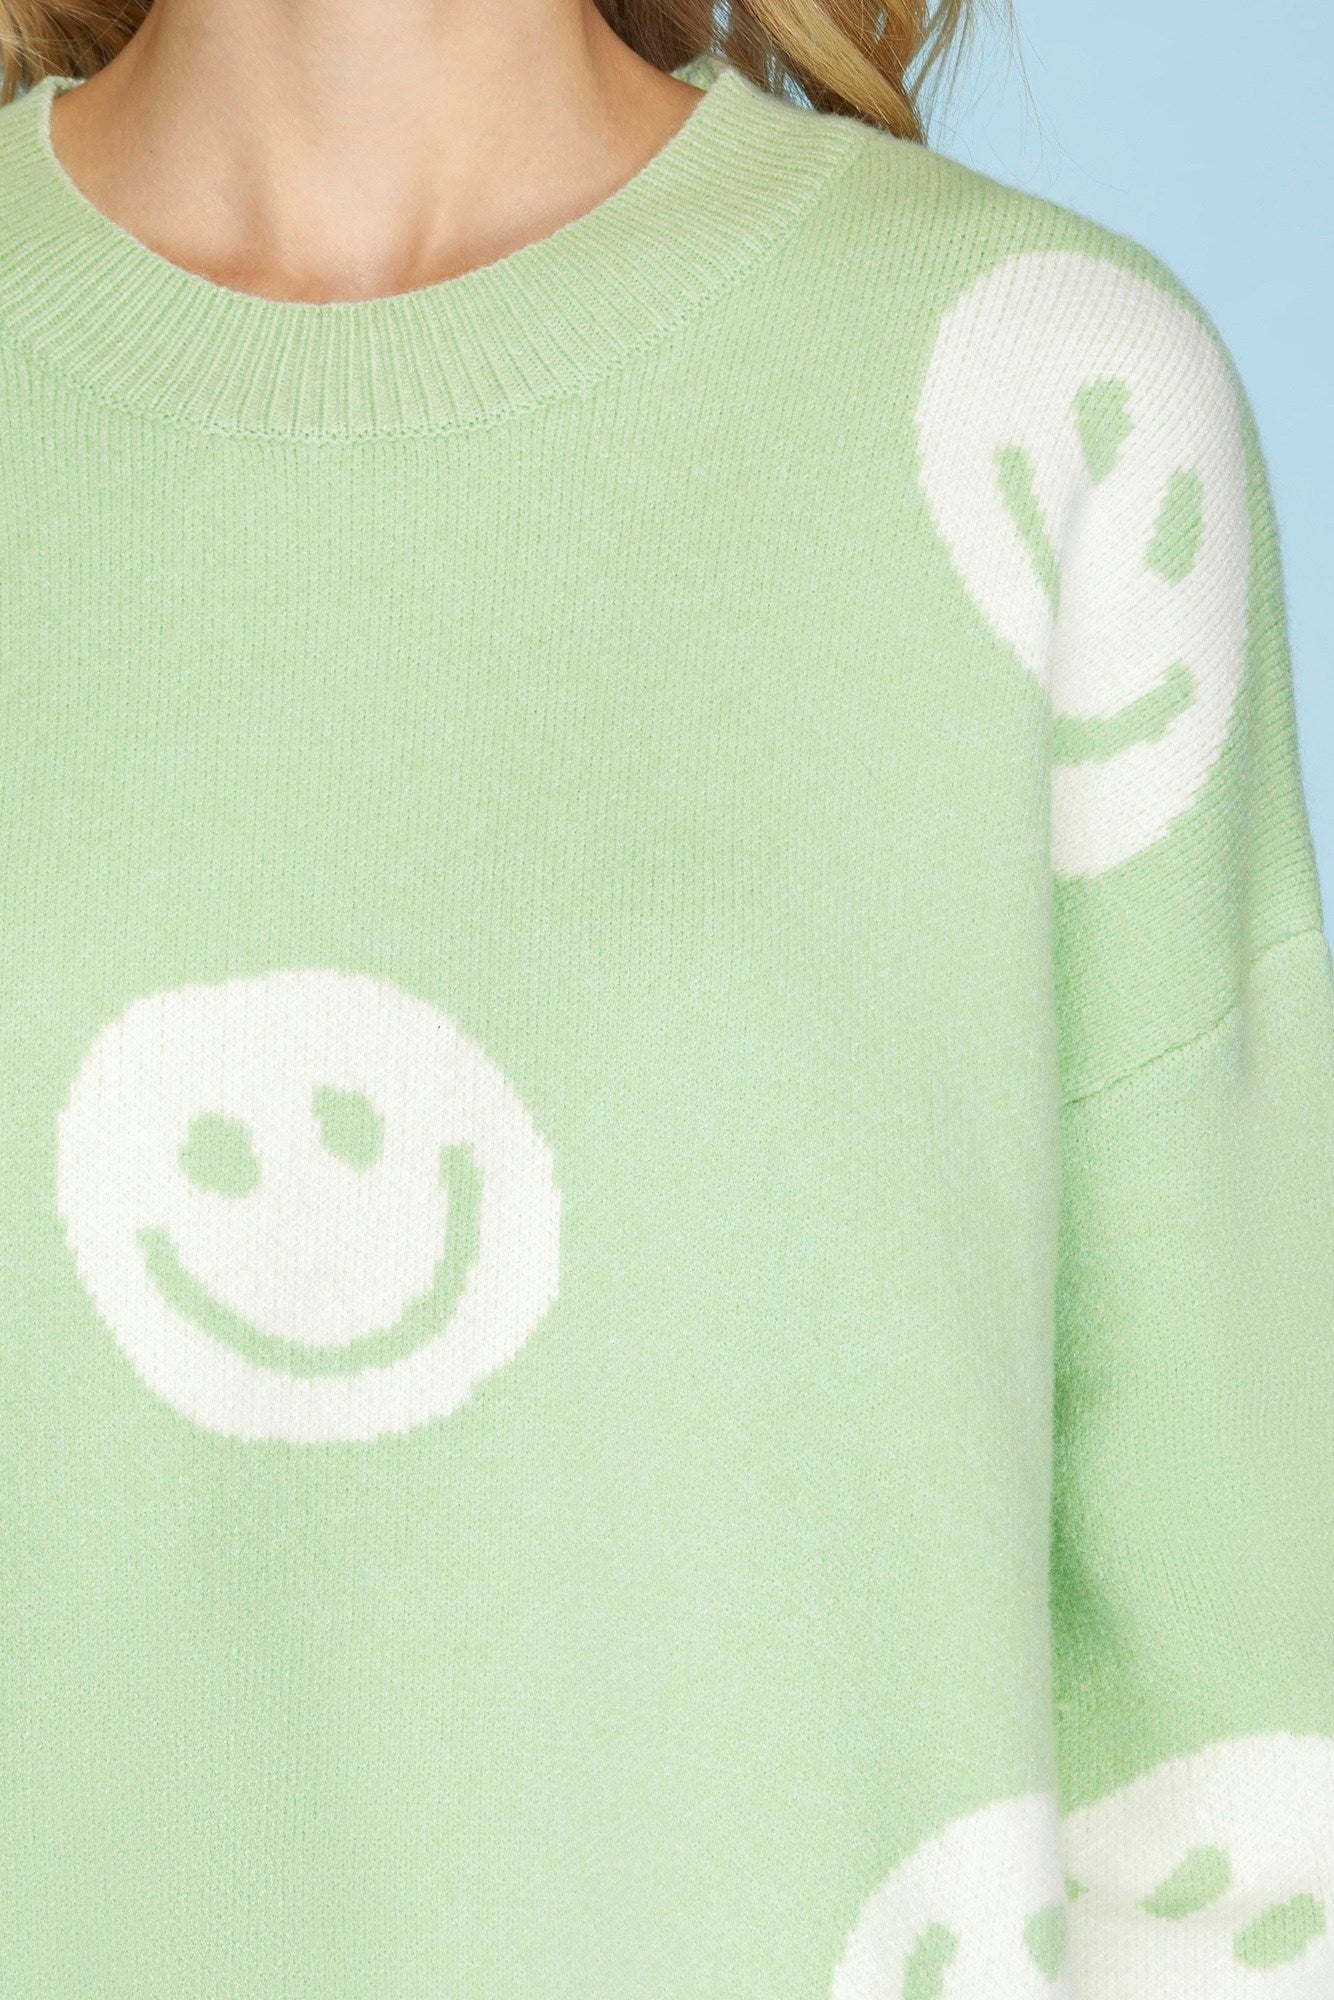 Smiley Face Pattern Sweater